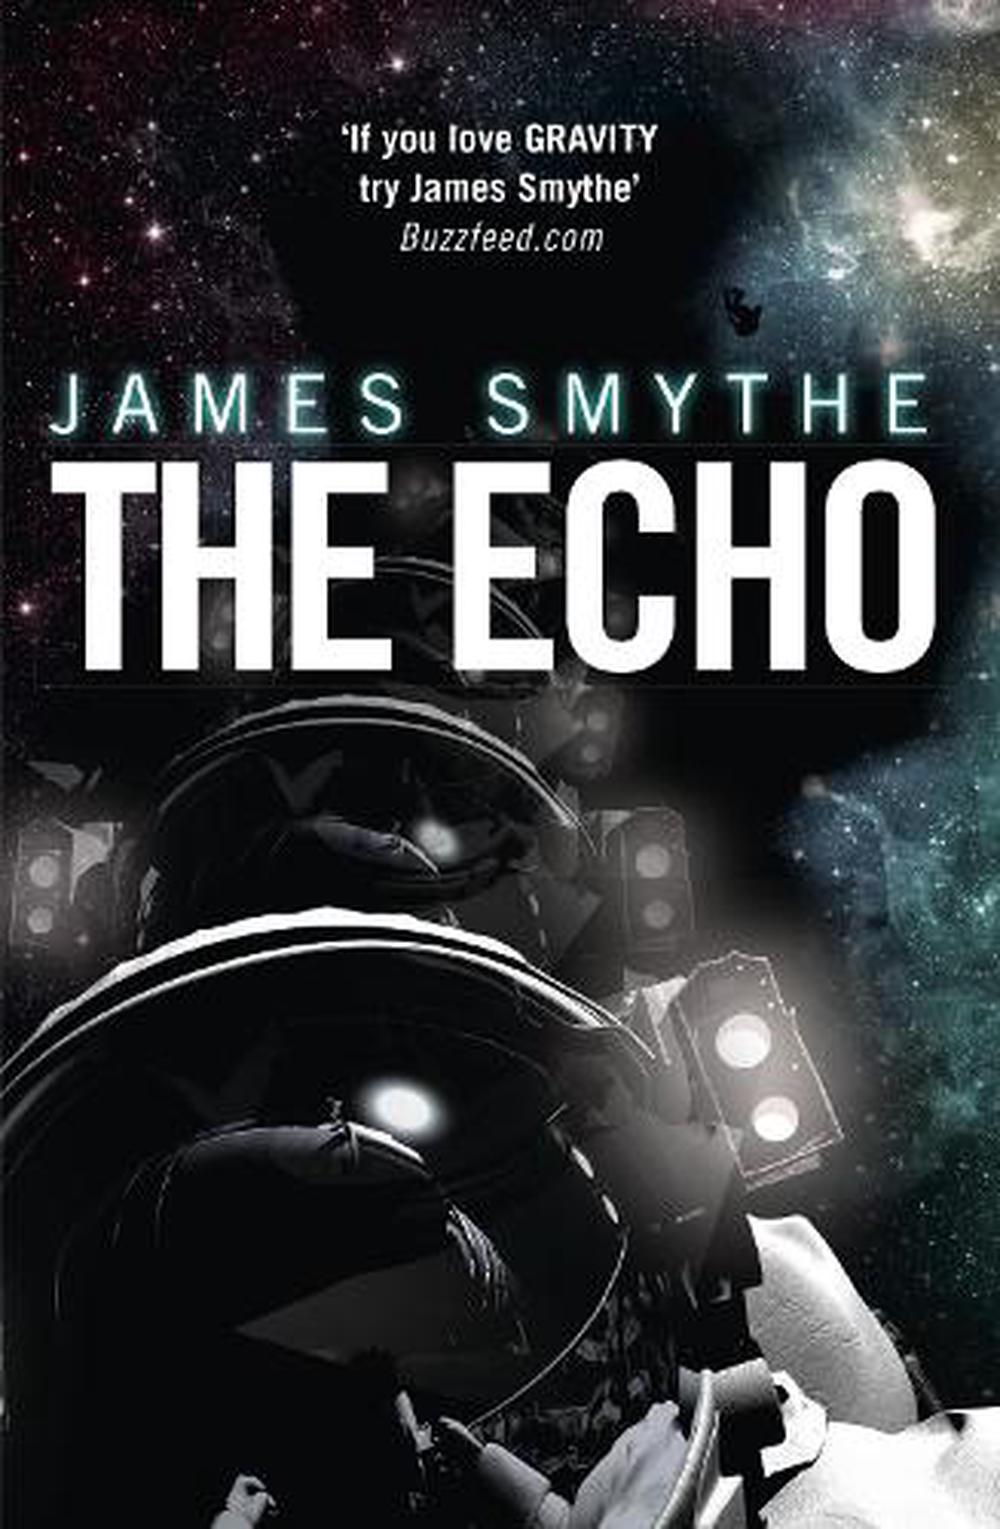 Echo by James Smythe (English) Paperback Book Free Shipping ...